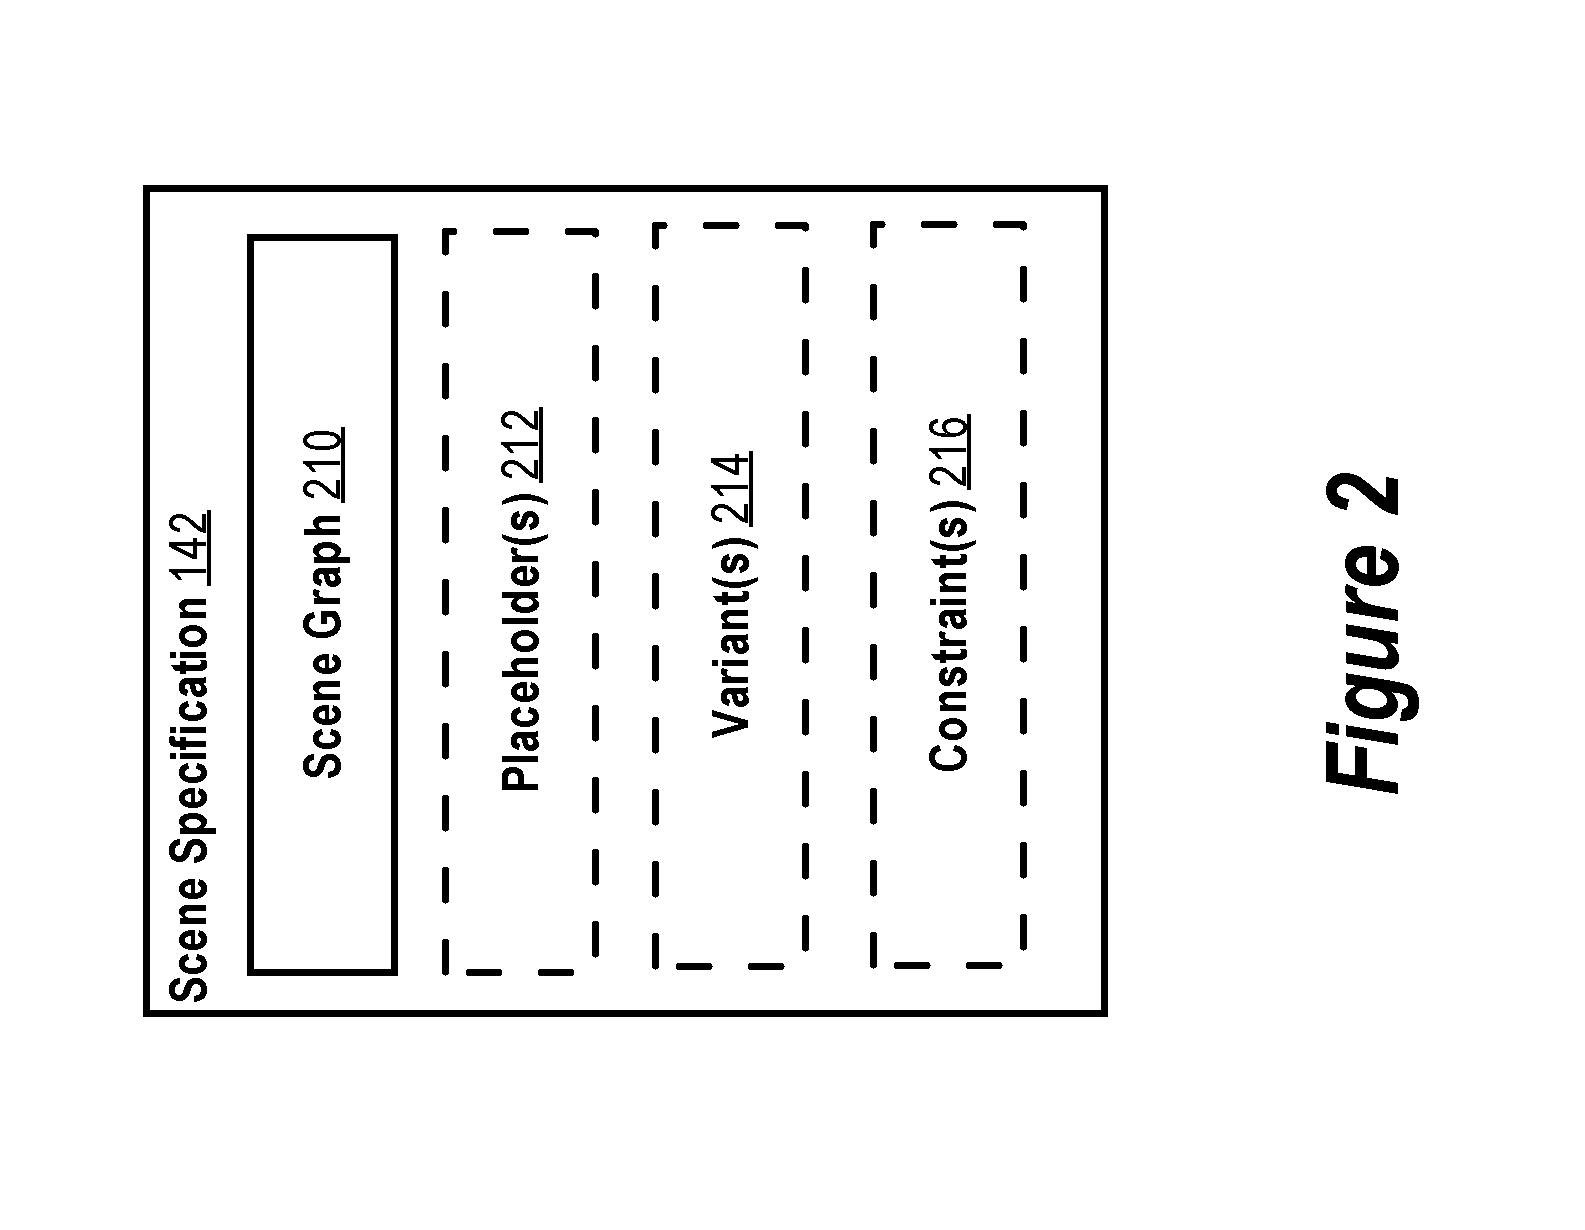 Digital video builder system with designer-controlled user interaction